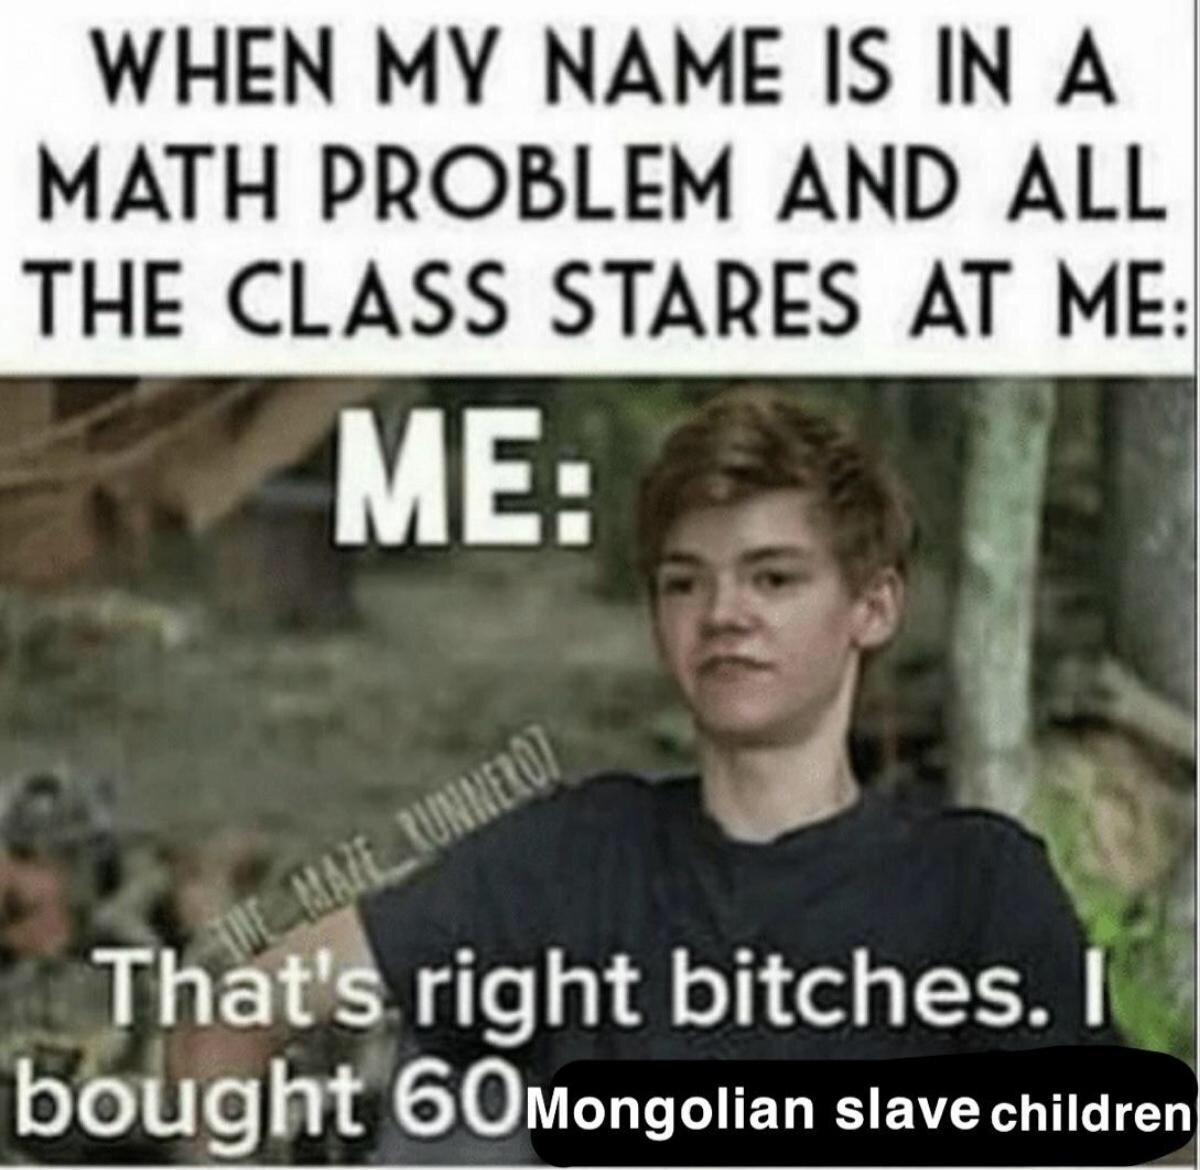 your name is in a math problem - When My Name Is In A Math Problem And All The Class Stares At Me Me That's right bitches. bought 60Mongolian slave children